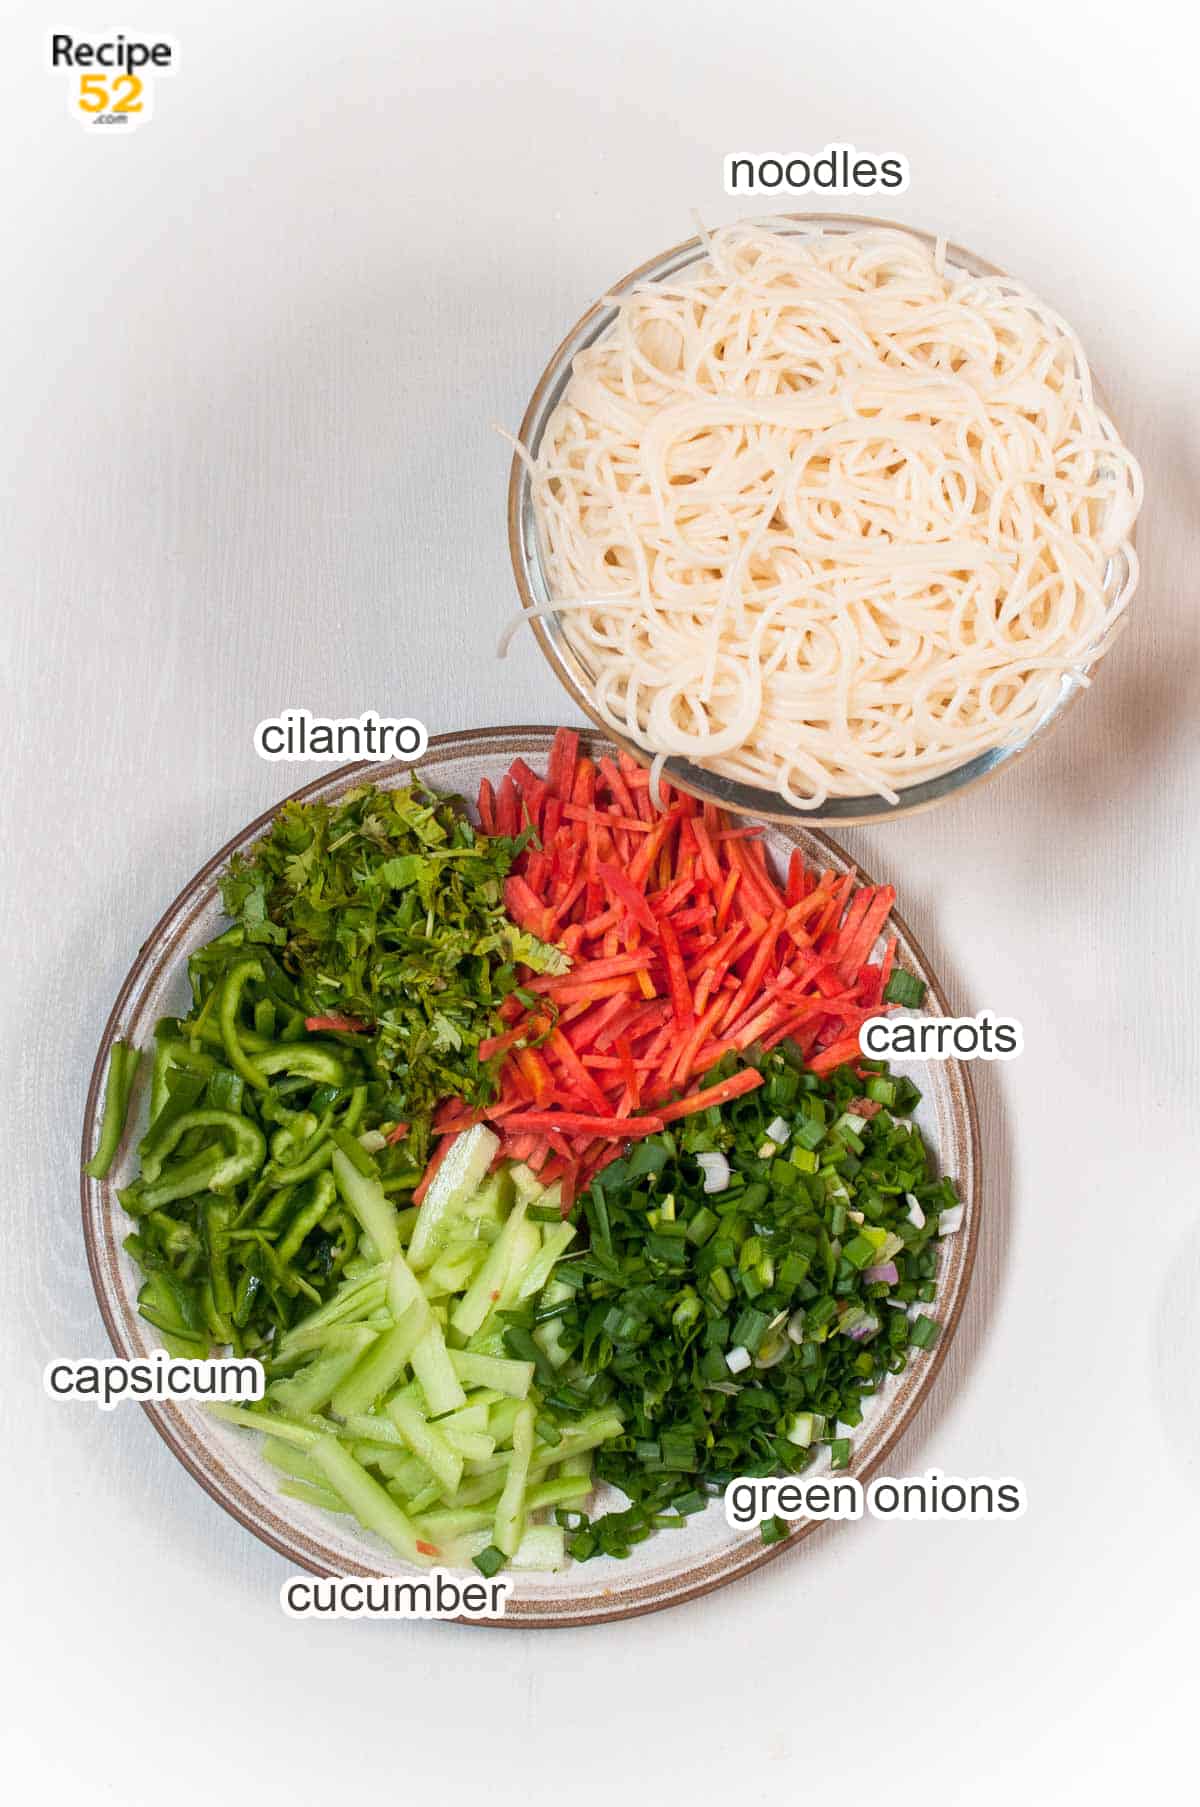 Noodles in a bowl and assorted veggies in a plate on the white background.